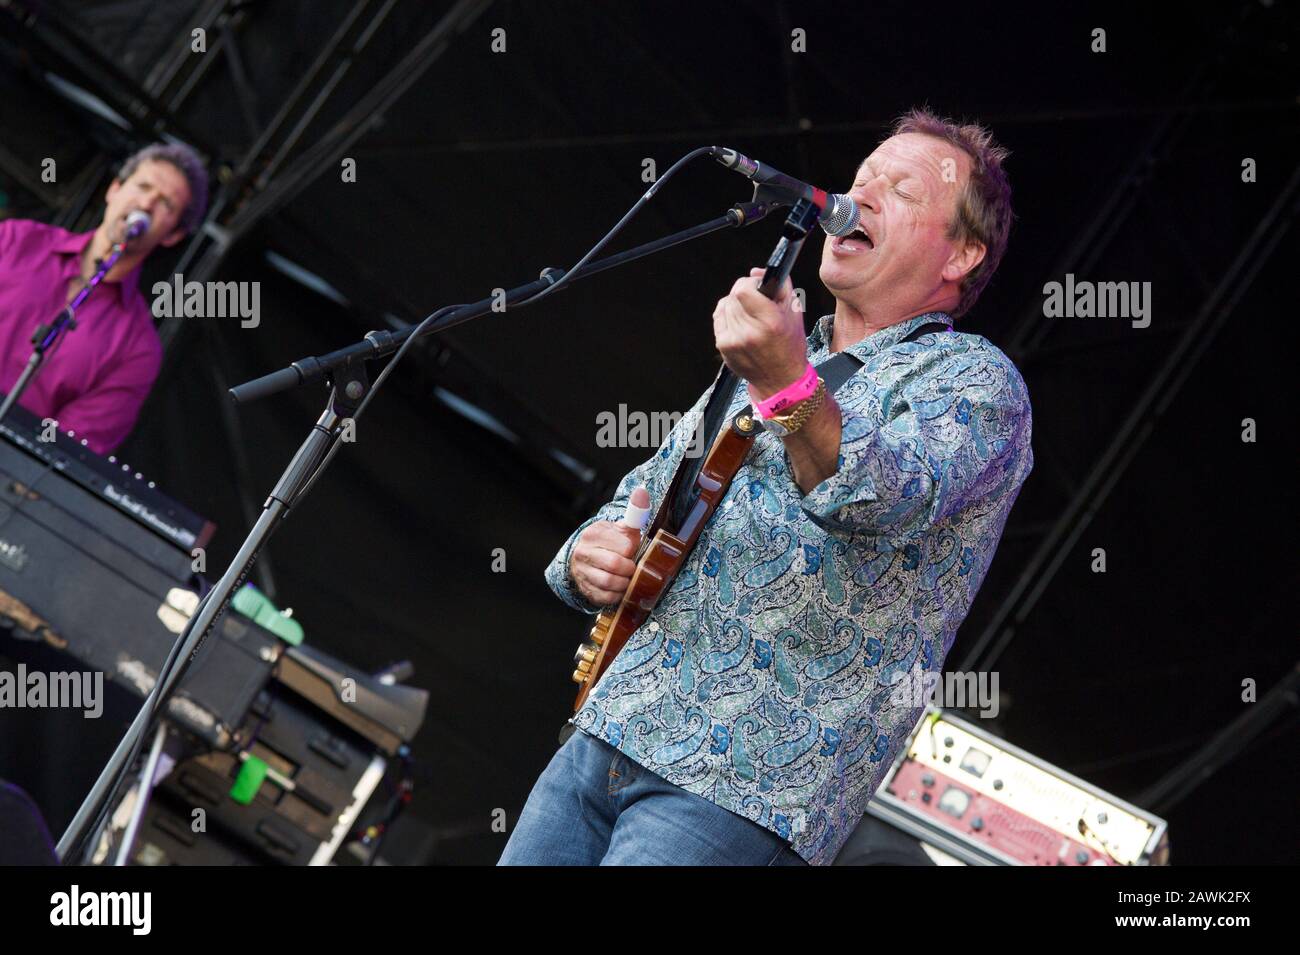 Mark King with Level 42 at the Midlands Music Festival Stock Photo